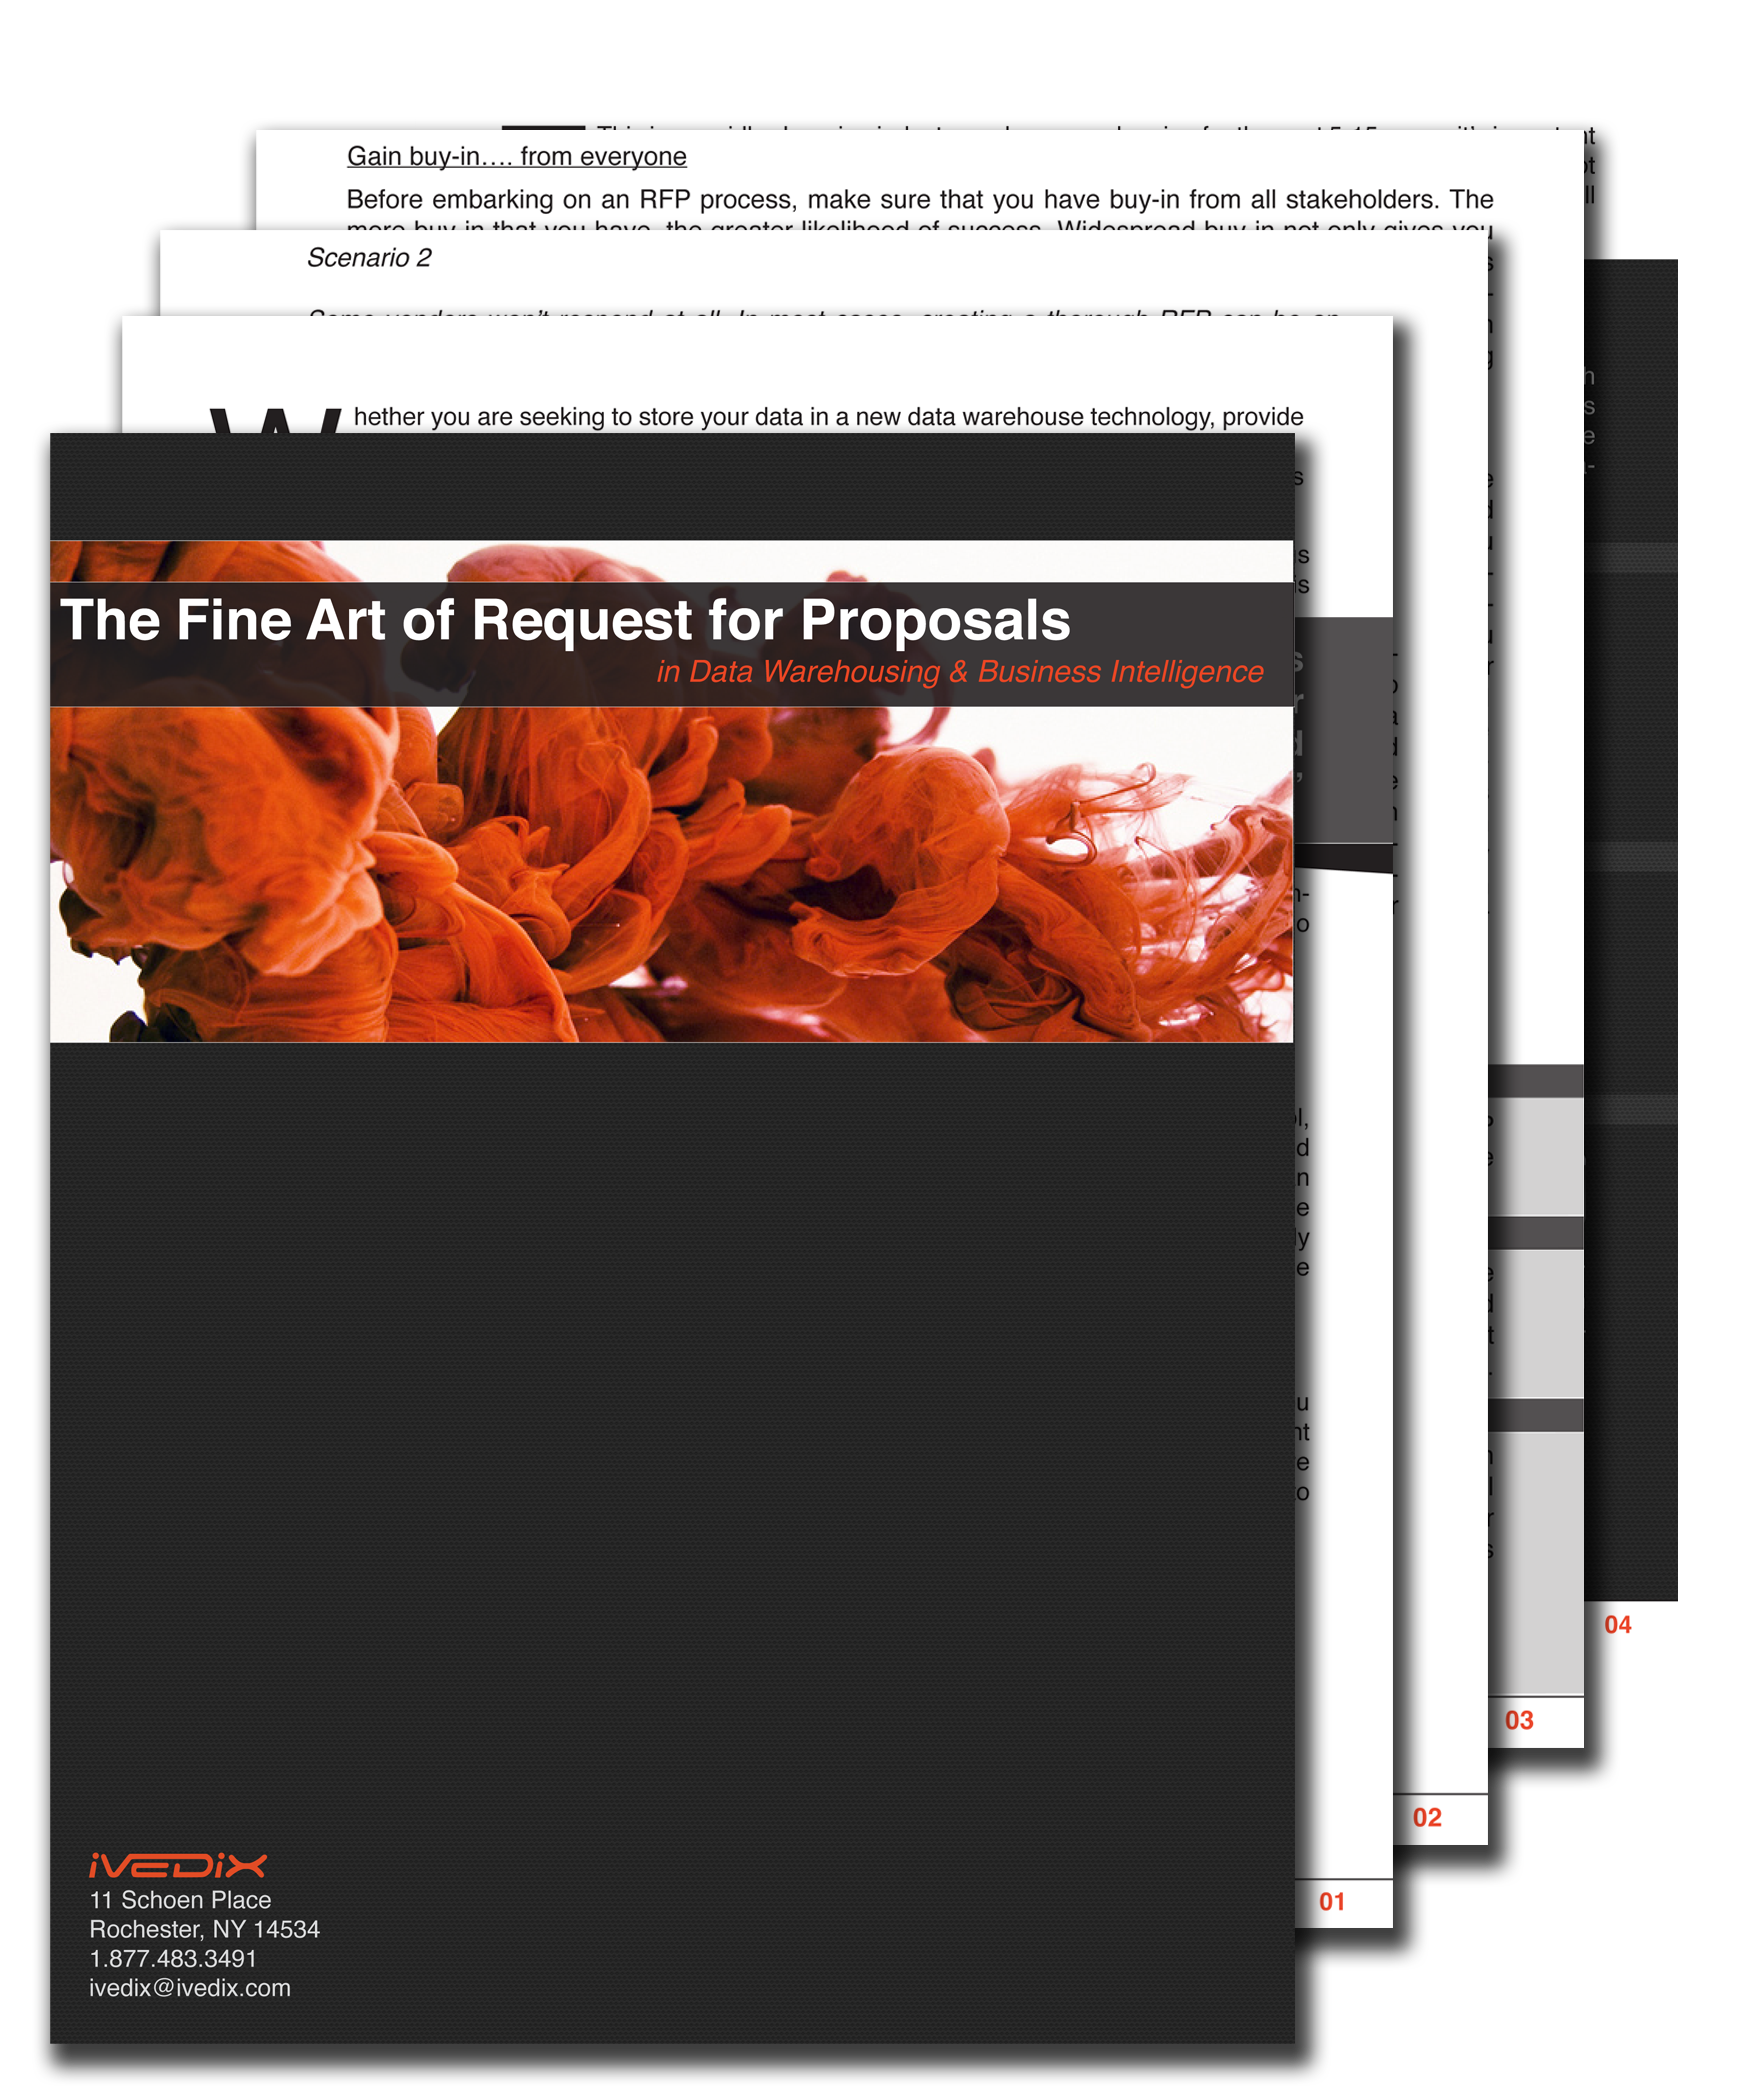 the fine art of rfps in data warehousing and business intelligence whitepaper